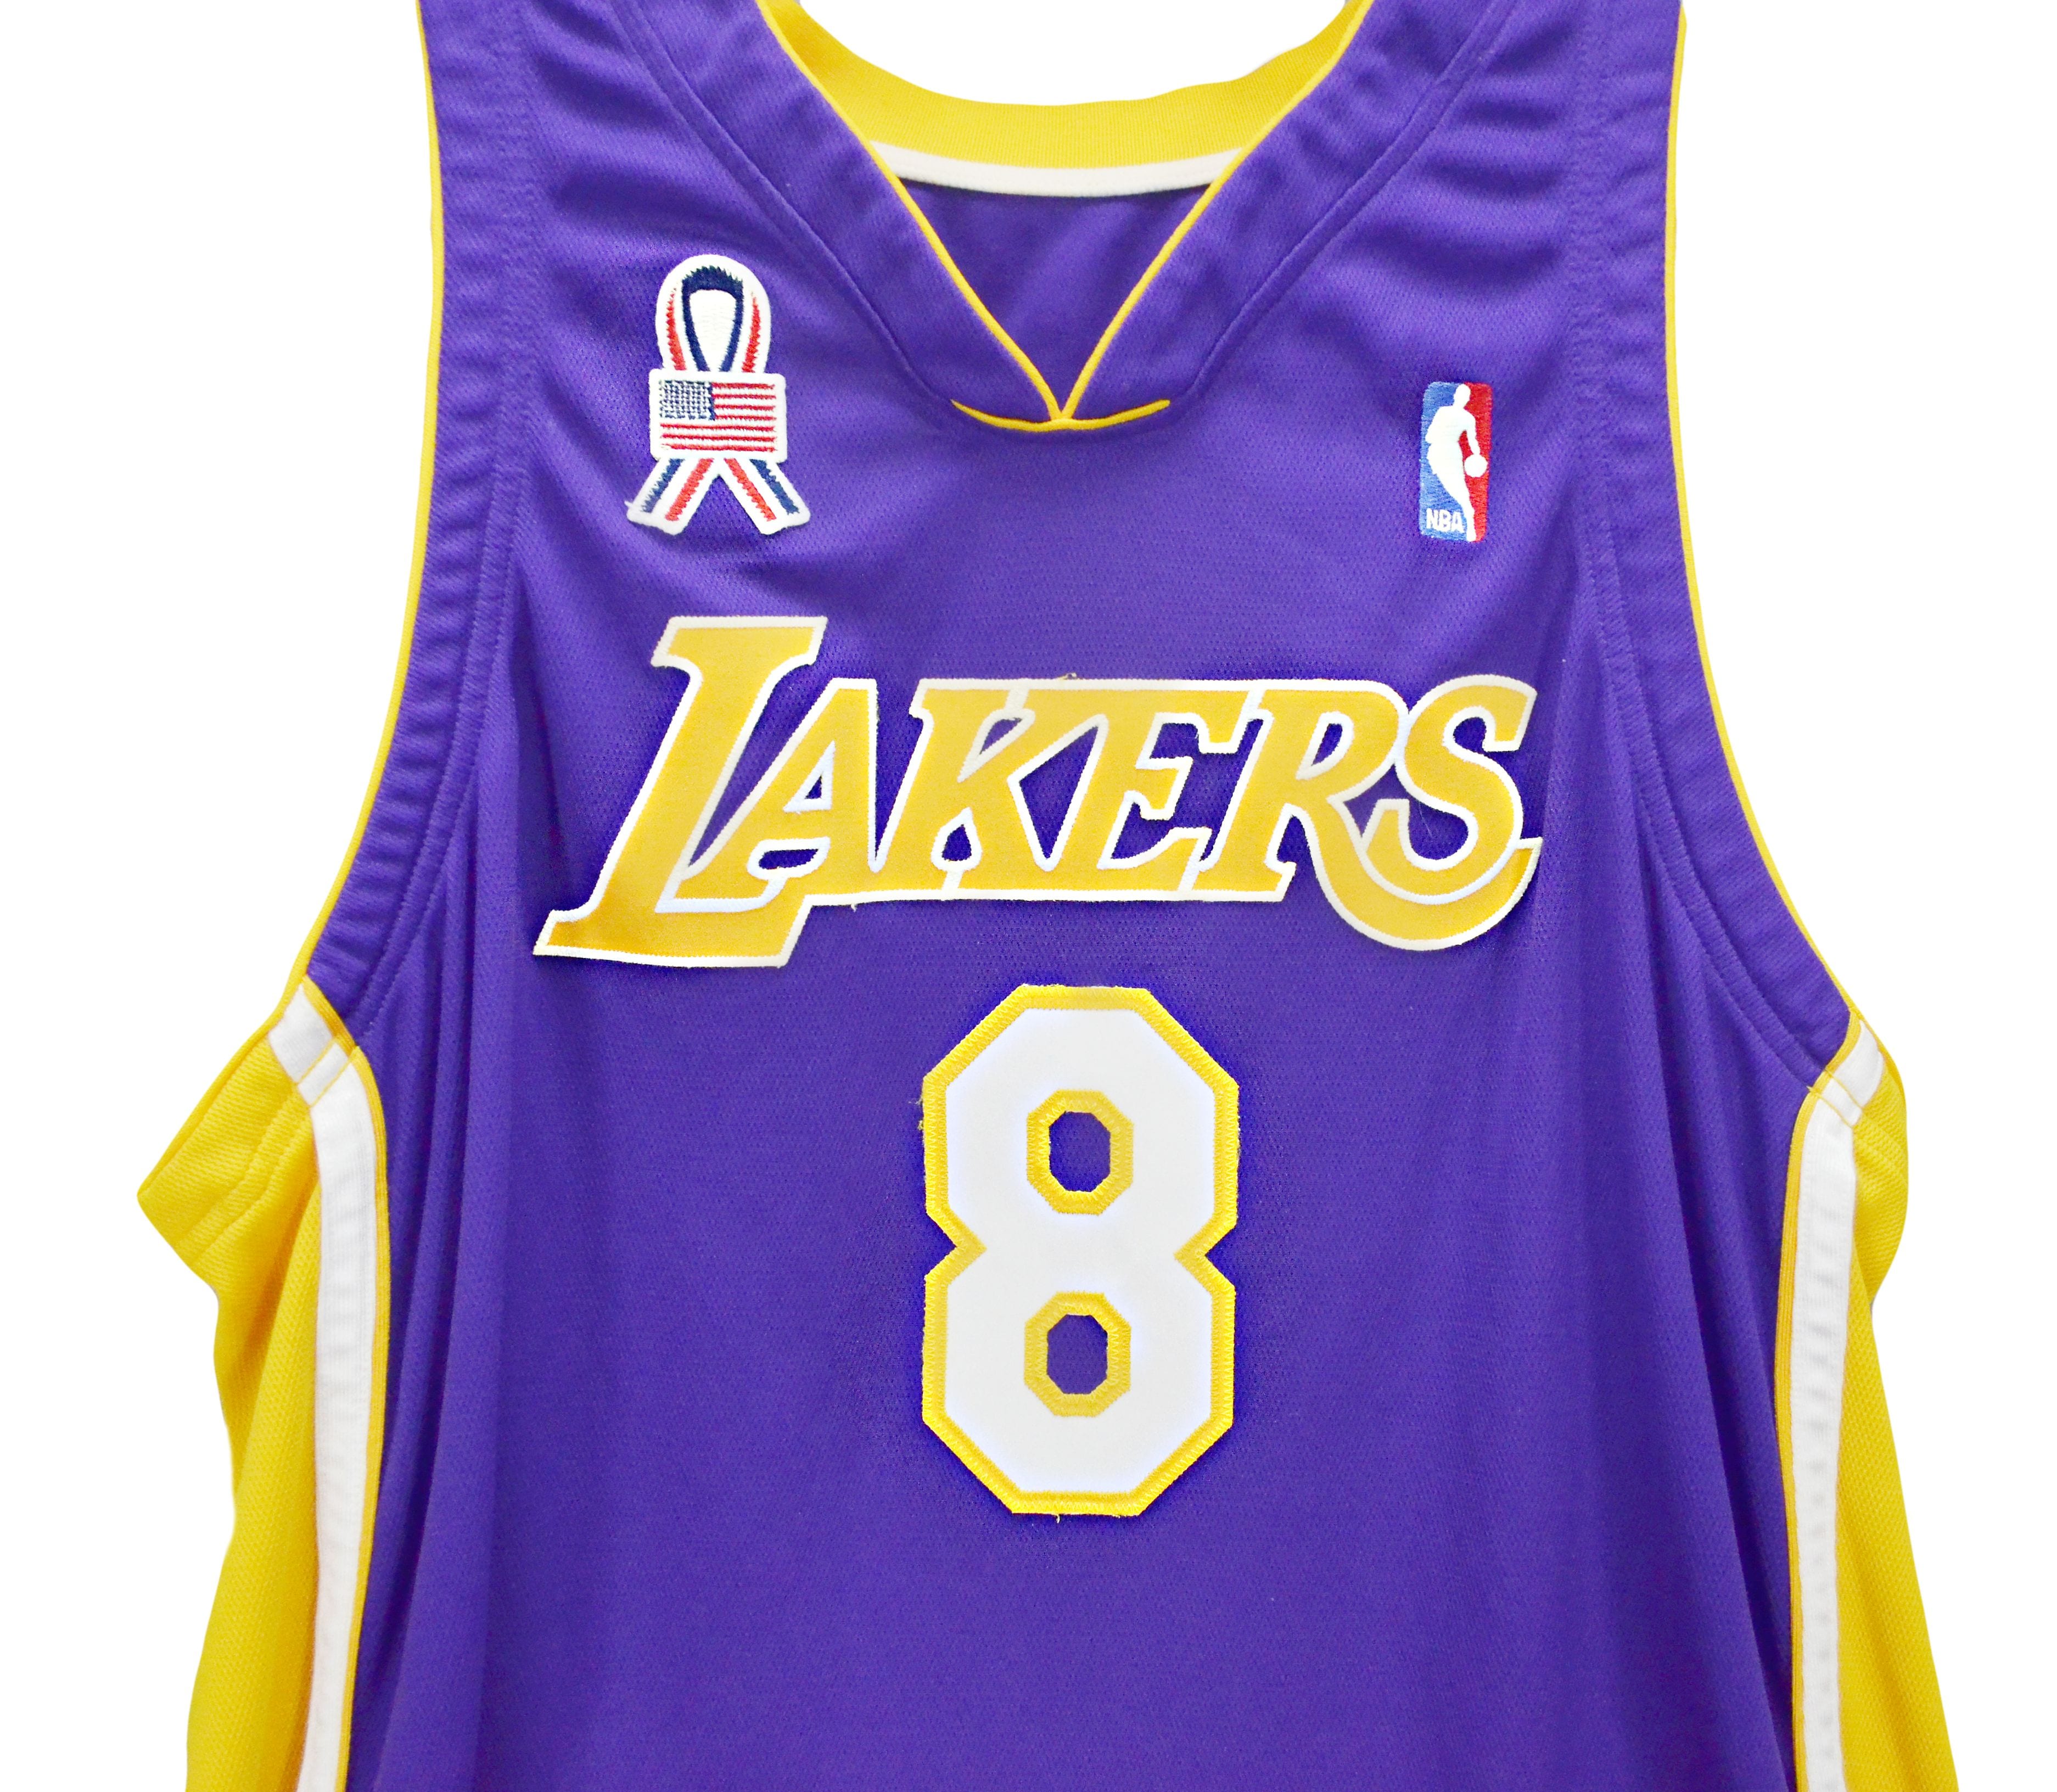 white and blue lakers jersey